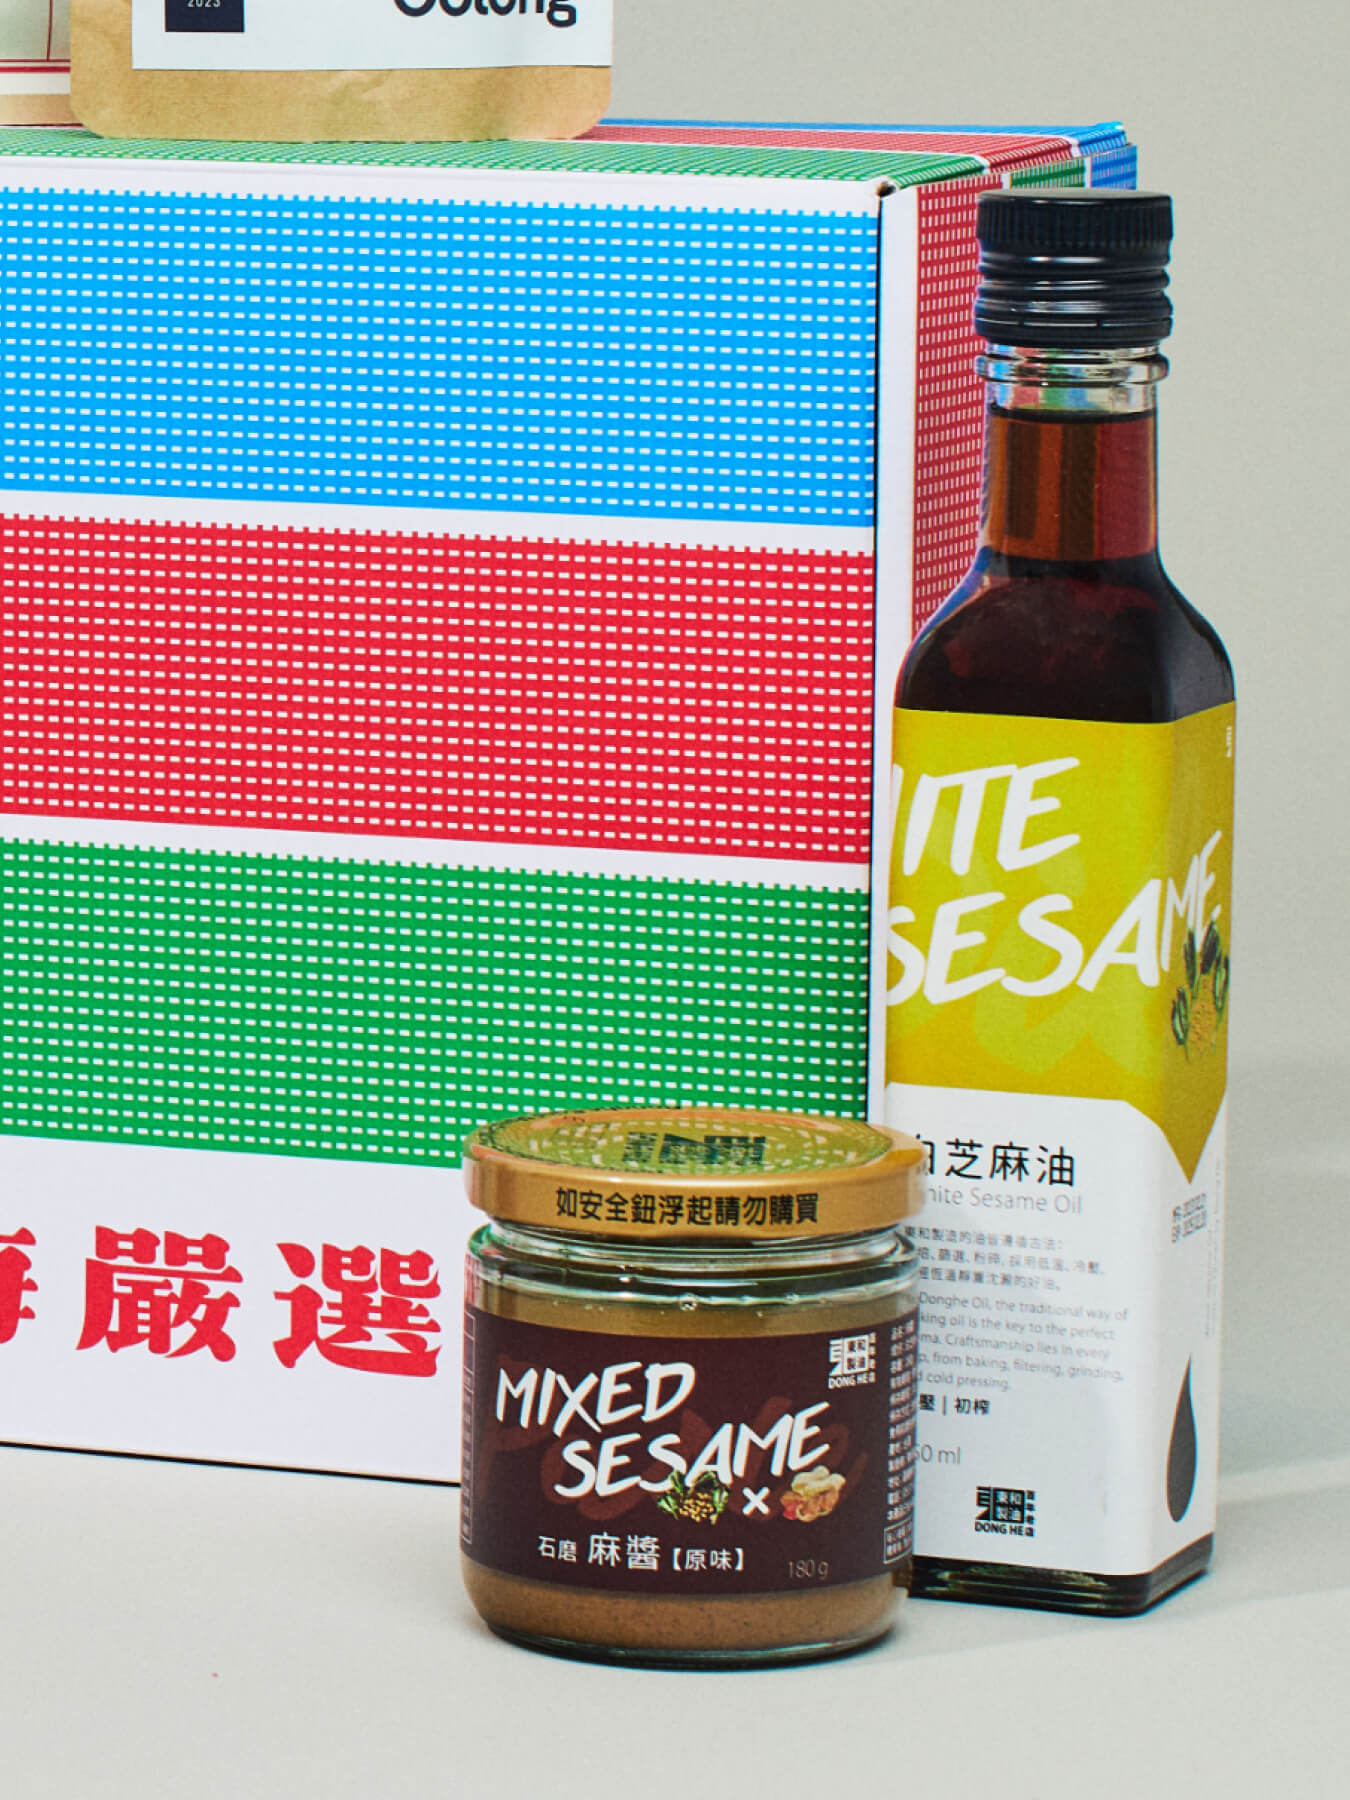 Essential Taiwanese Pantry Gift Set